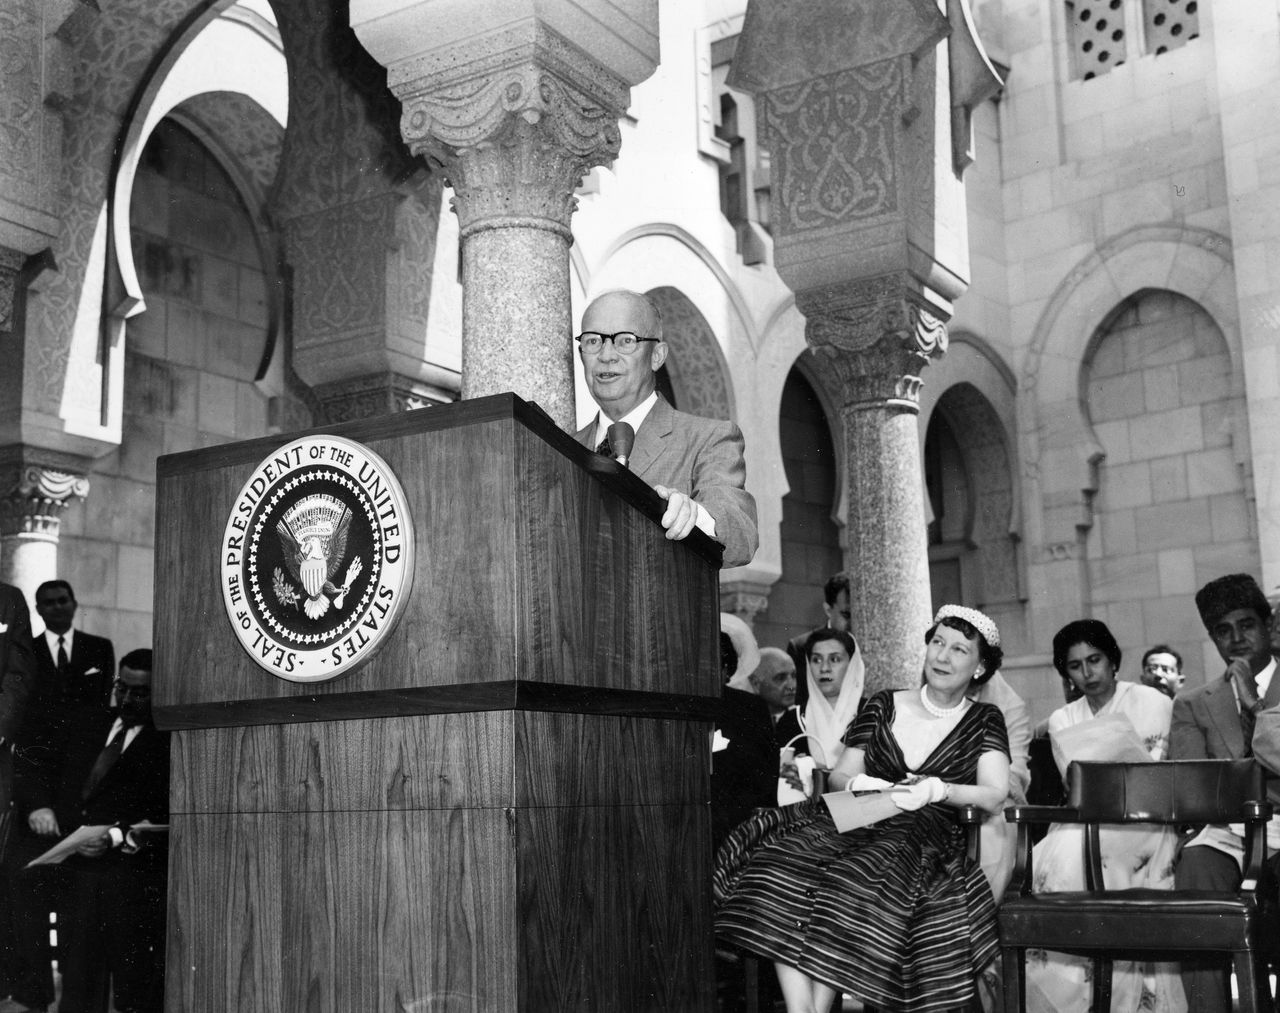 President Dwight D. Eisenhower, who was a Republican, dedicates the Islamic Center of Washington in 1957. 